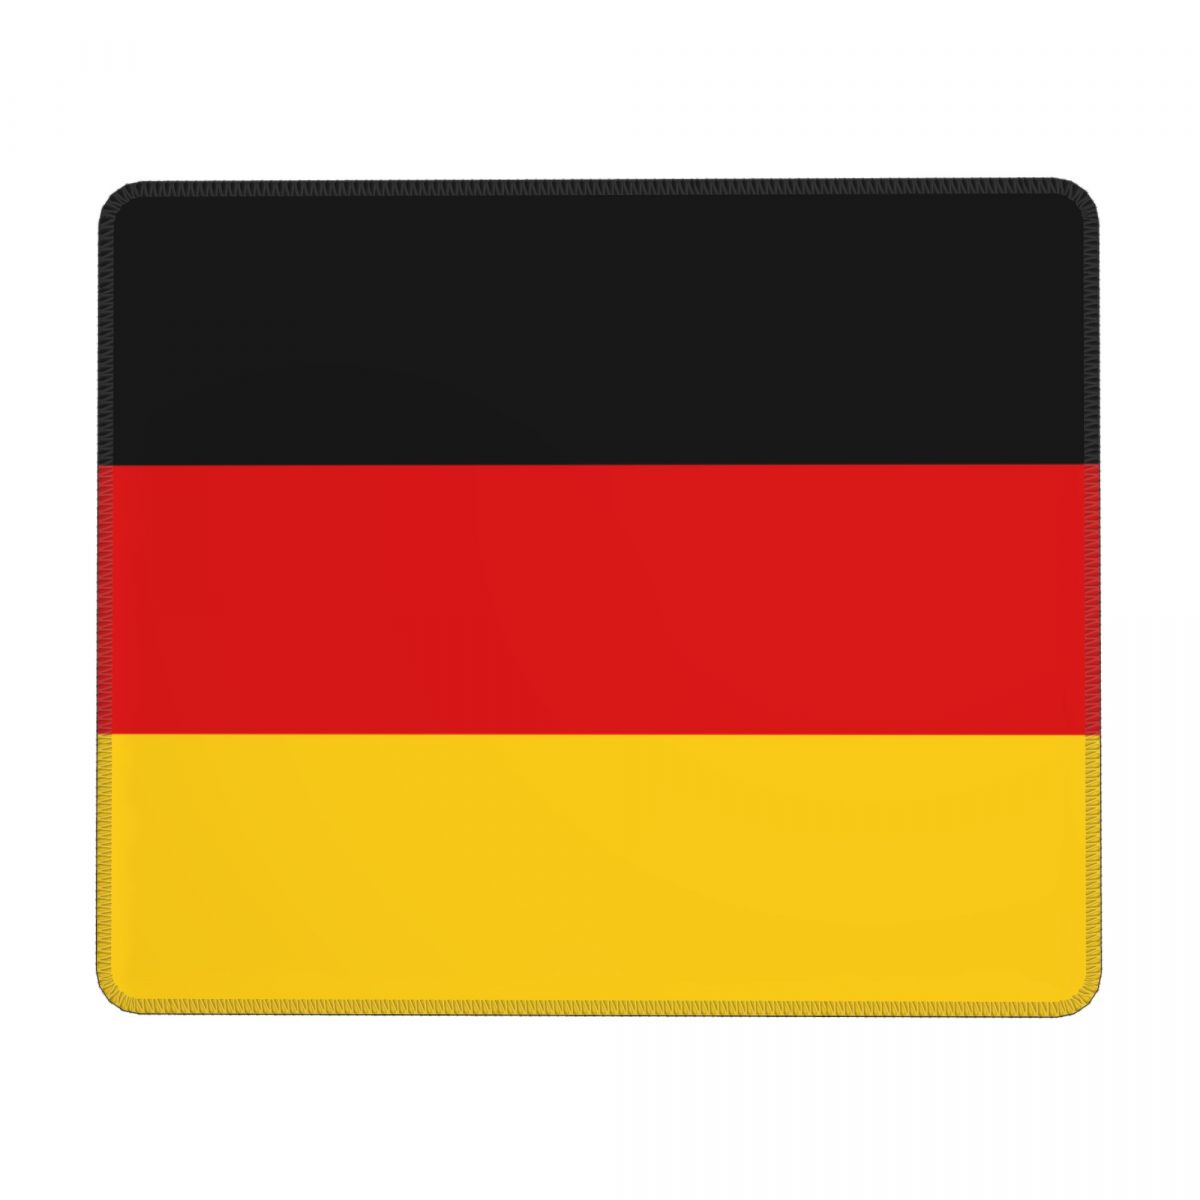 Germany Flag Square Rubber Base MousePads